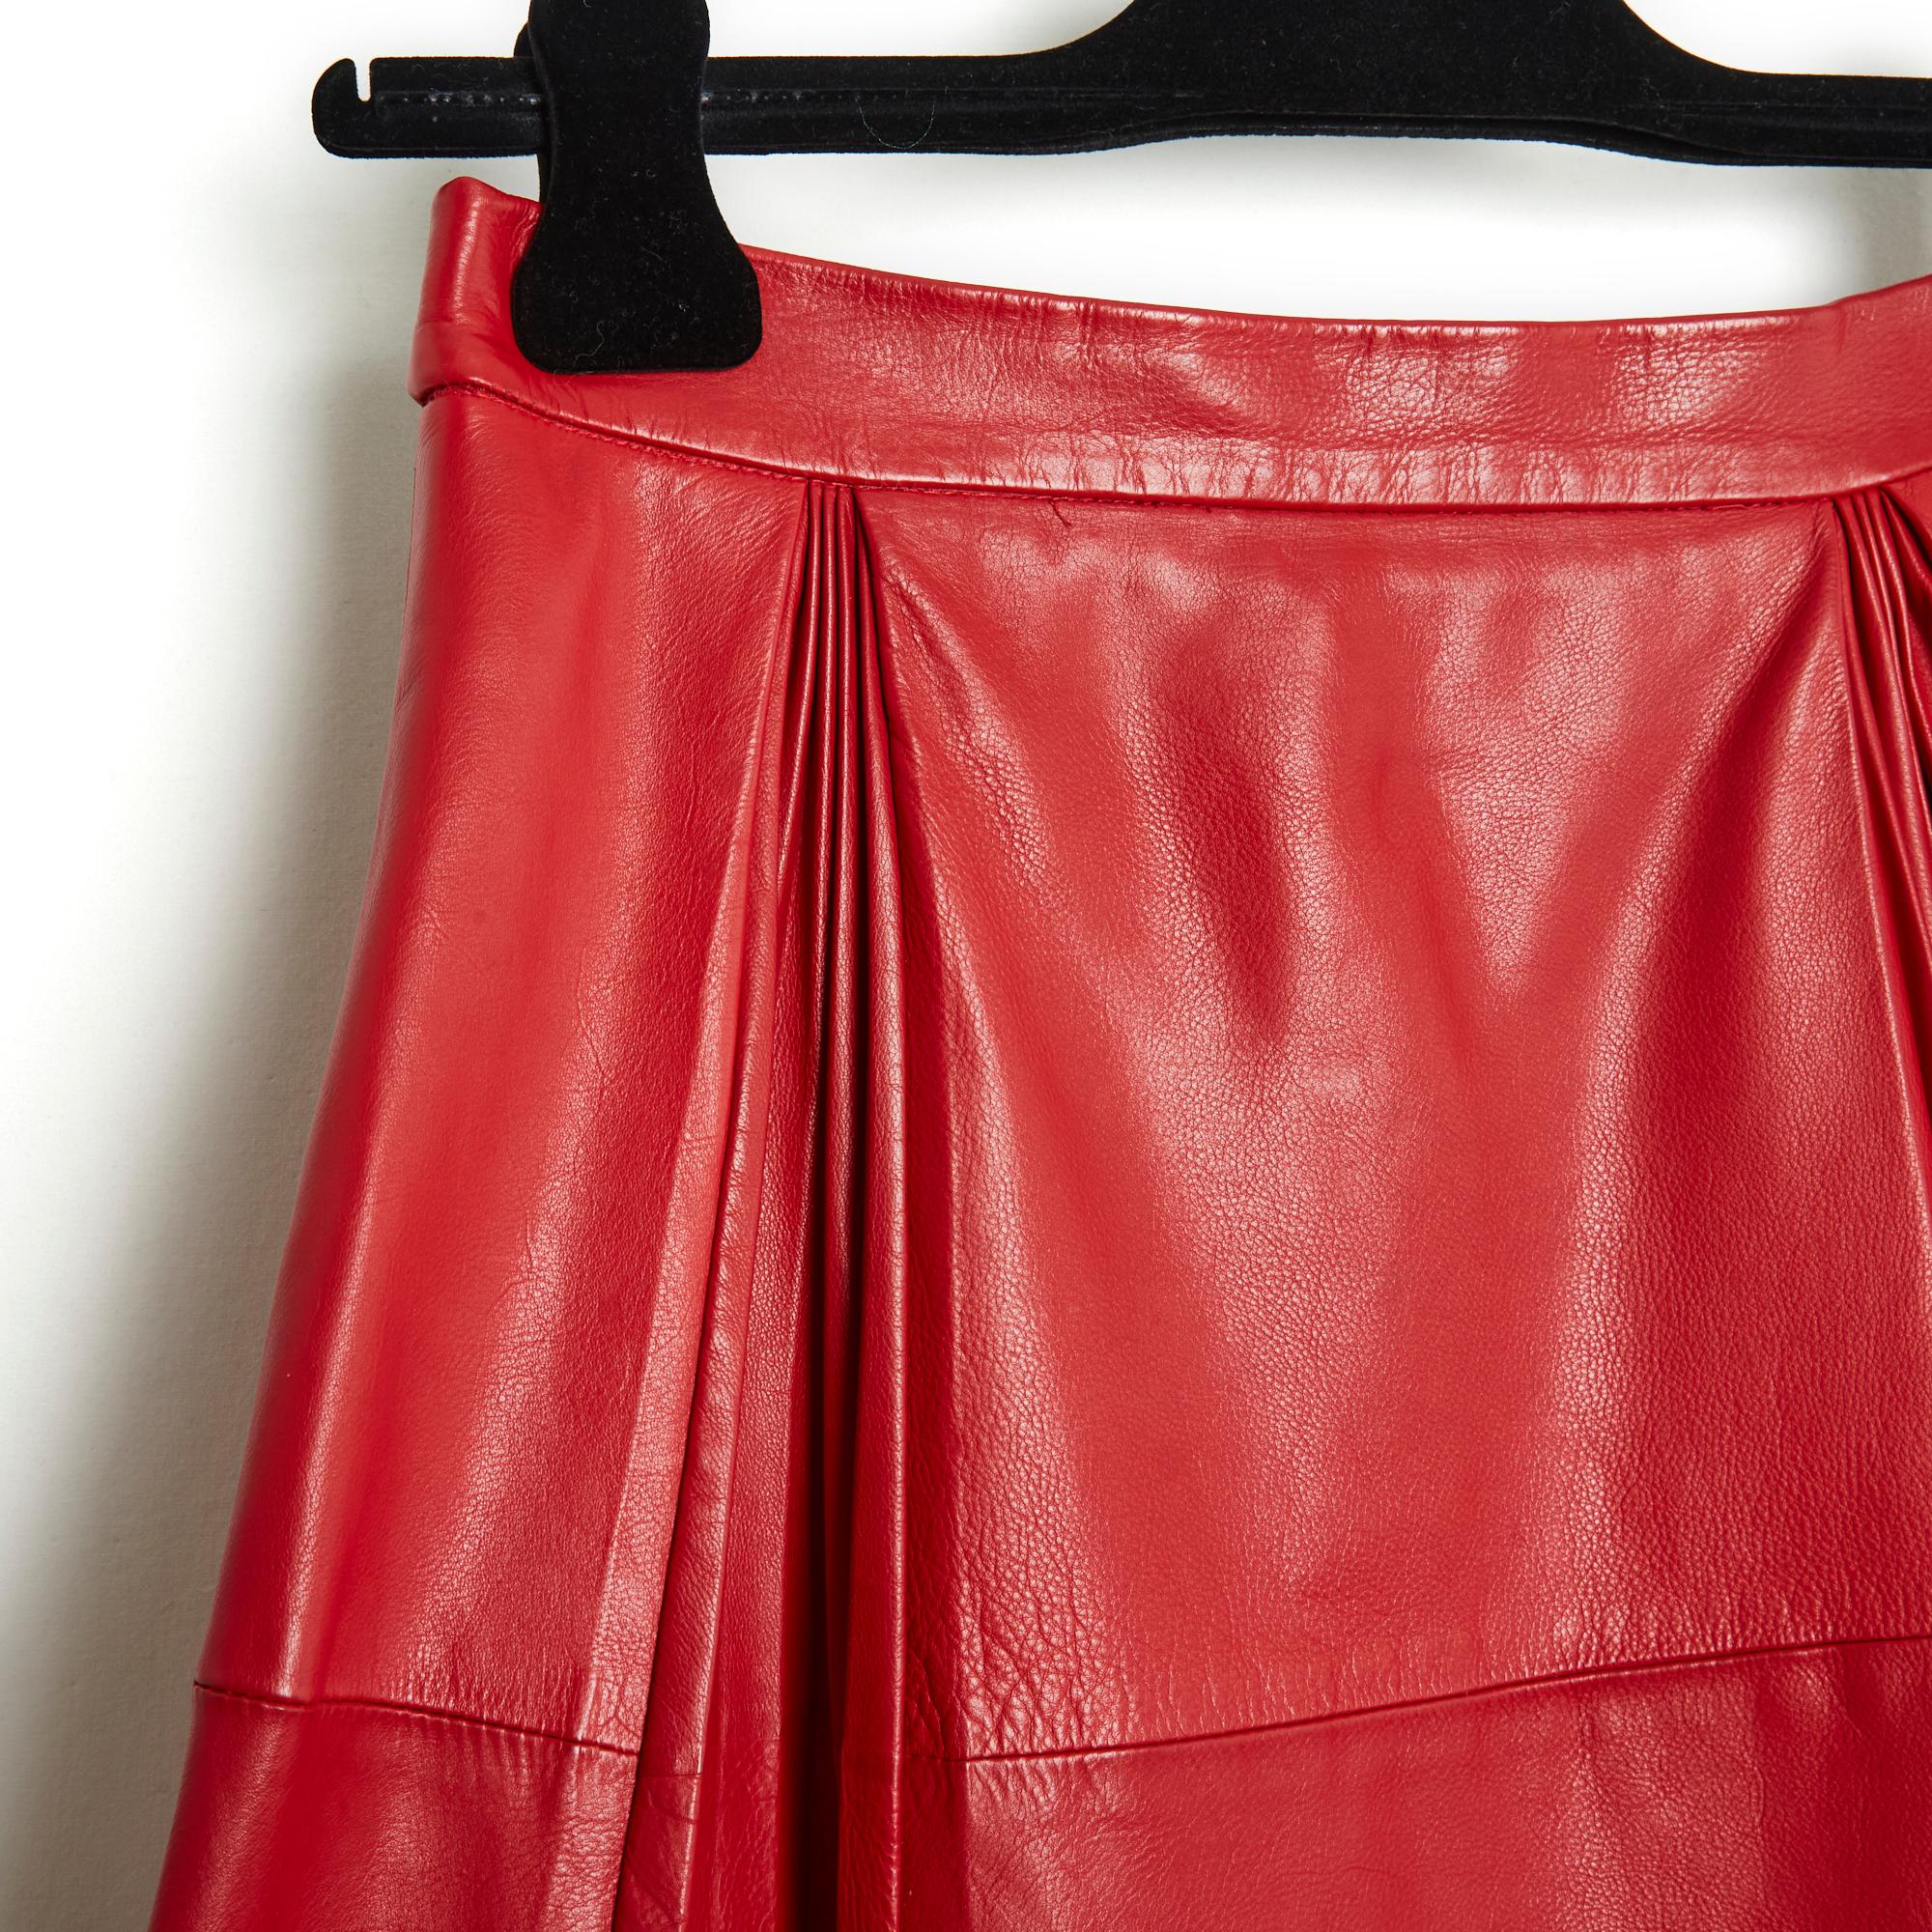 Gucci skirt in red leather (ultra soft), high waist, 1 pleated pleat on each side at the front and back, length above the ankle, matching silk crepe lining, zip and hook closure. Size 40IT or 36FR: size 33 cm, length 86 cm. The skirt has been worn